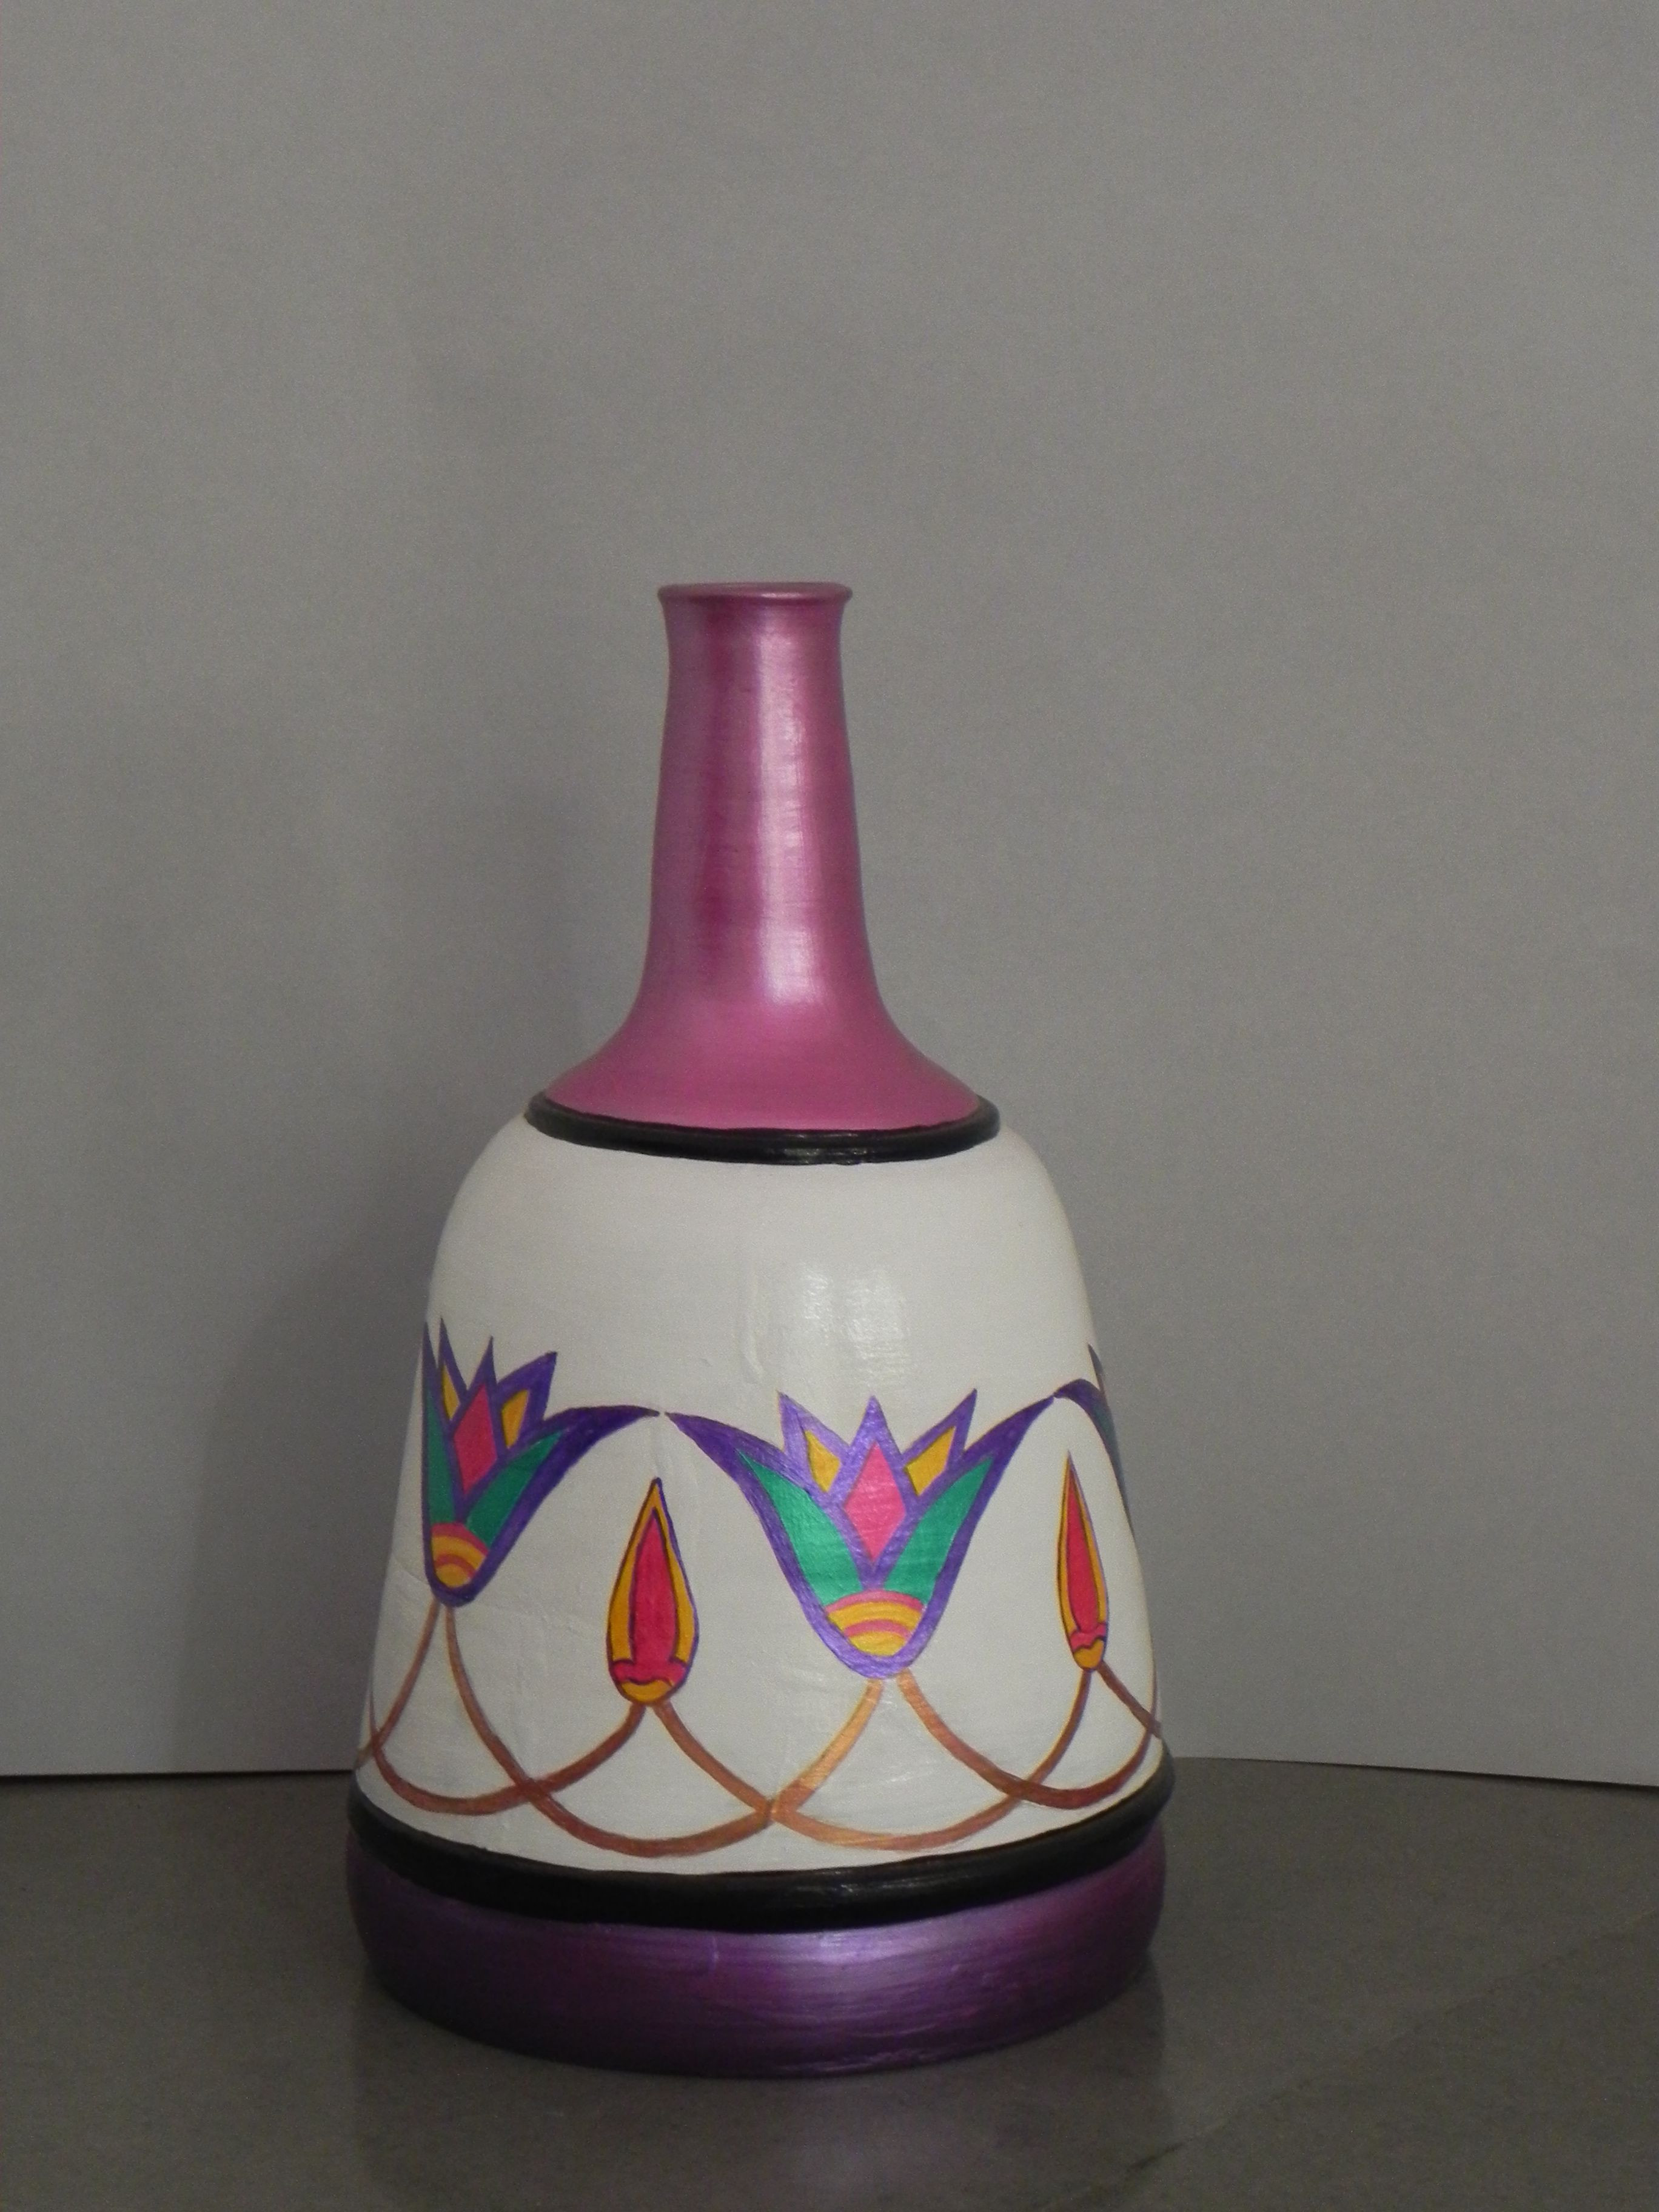 12 Recommended Extra Large Ceramic Vases 2024 free download extra large ceramic vases of egyptian style pot floral design in egyptian style white background within egyptian style pot floral design in egyptian style white background pink neck violet b